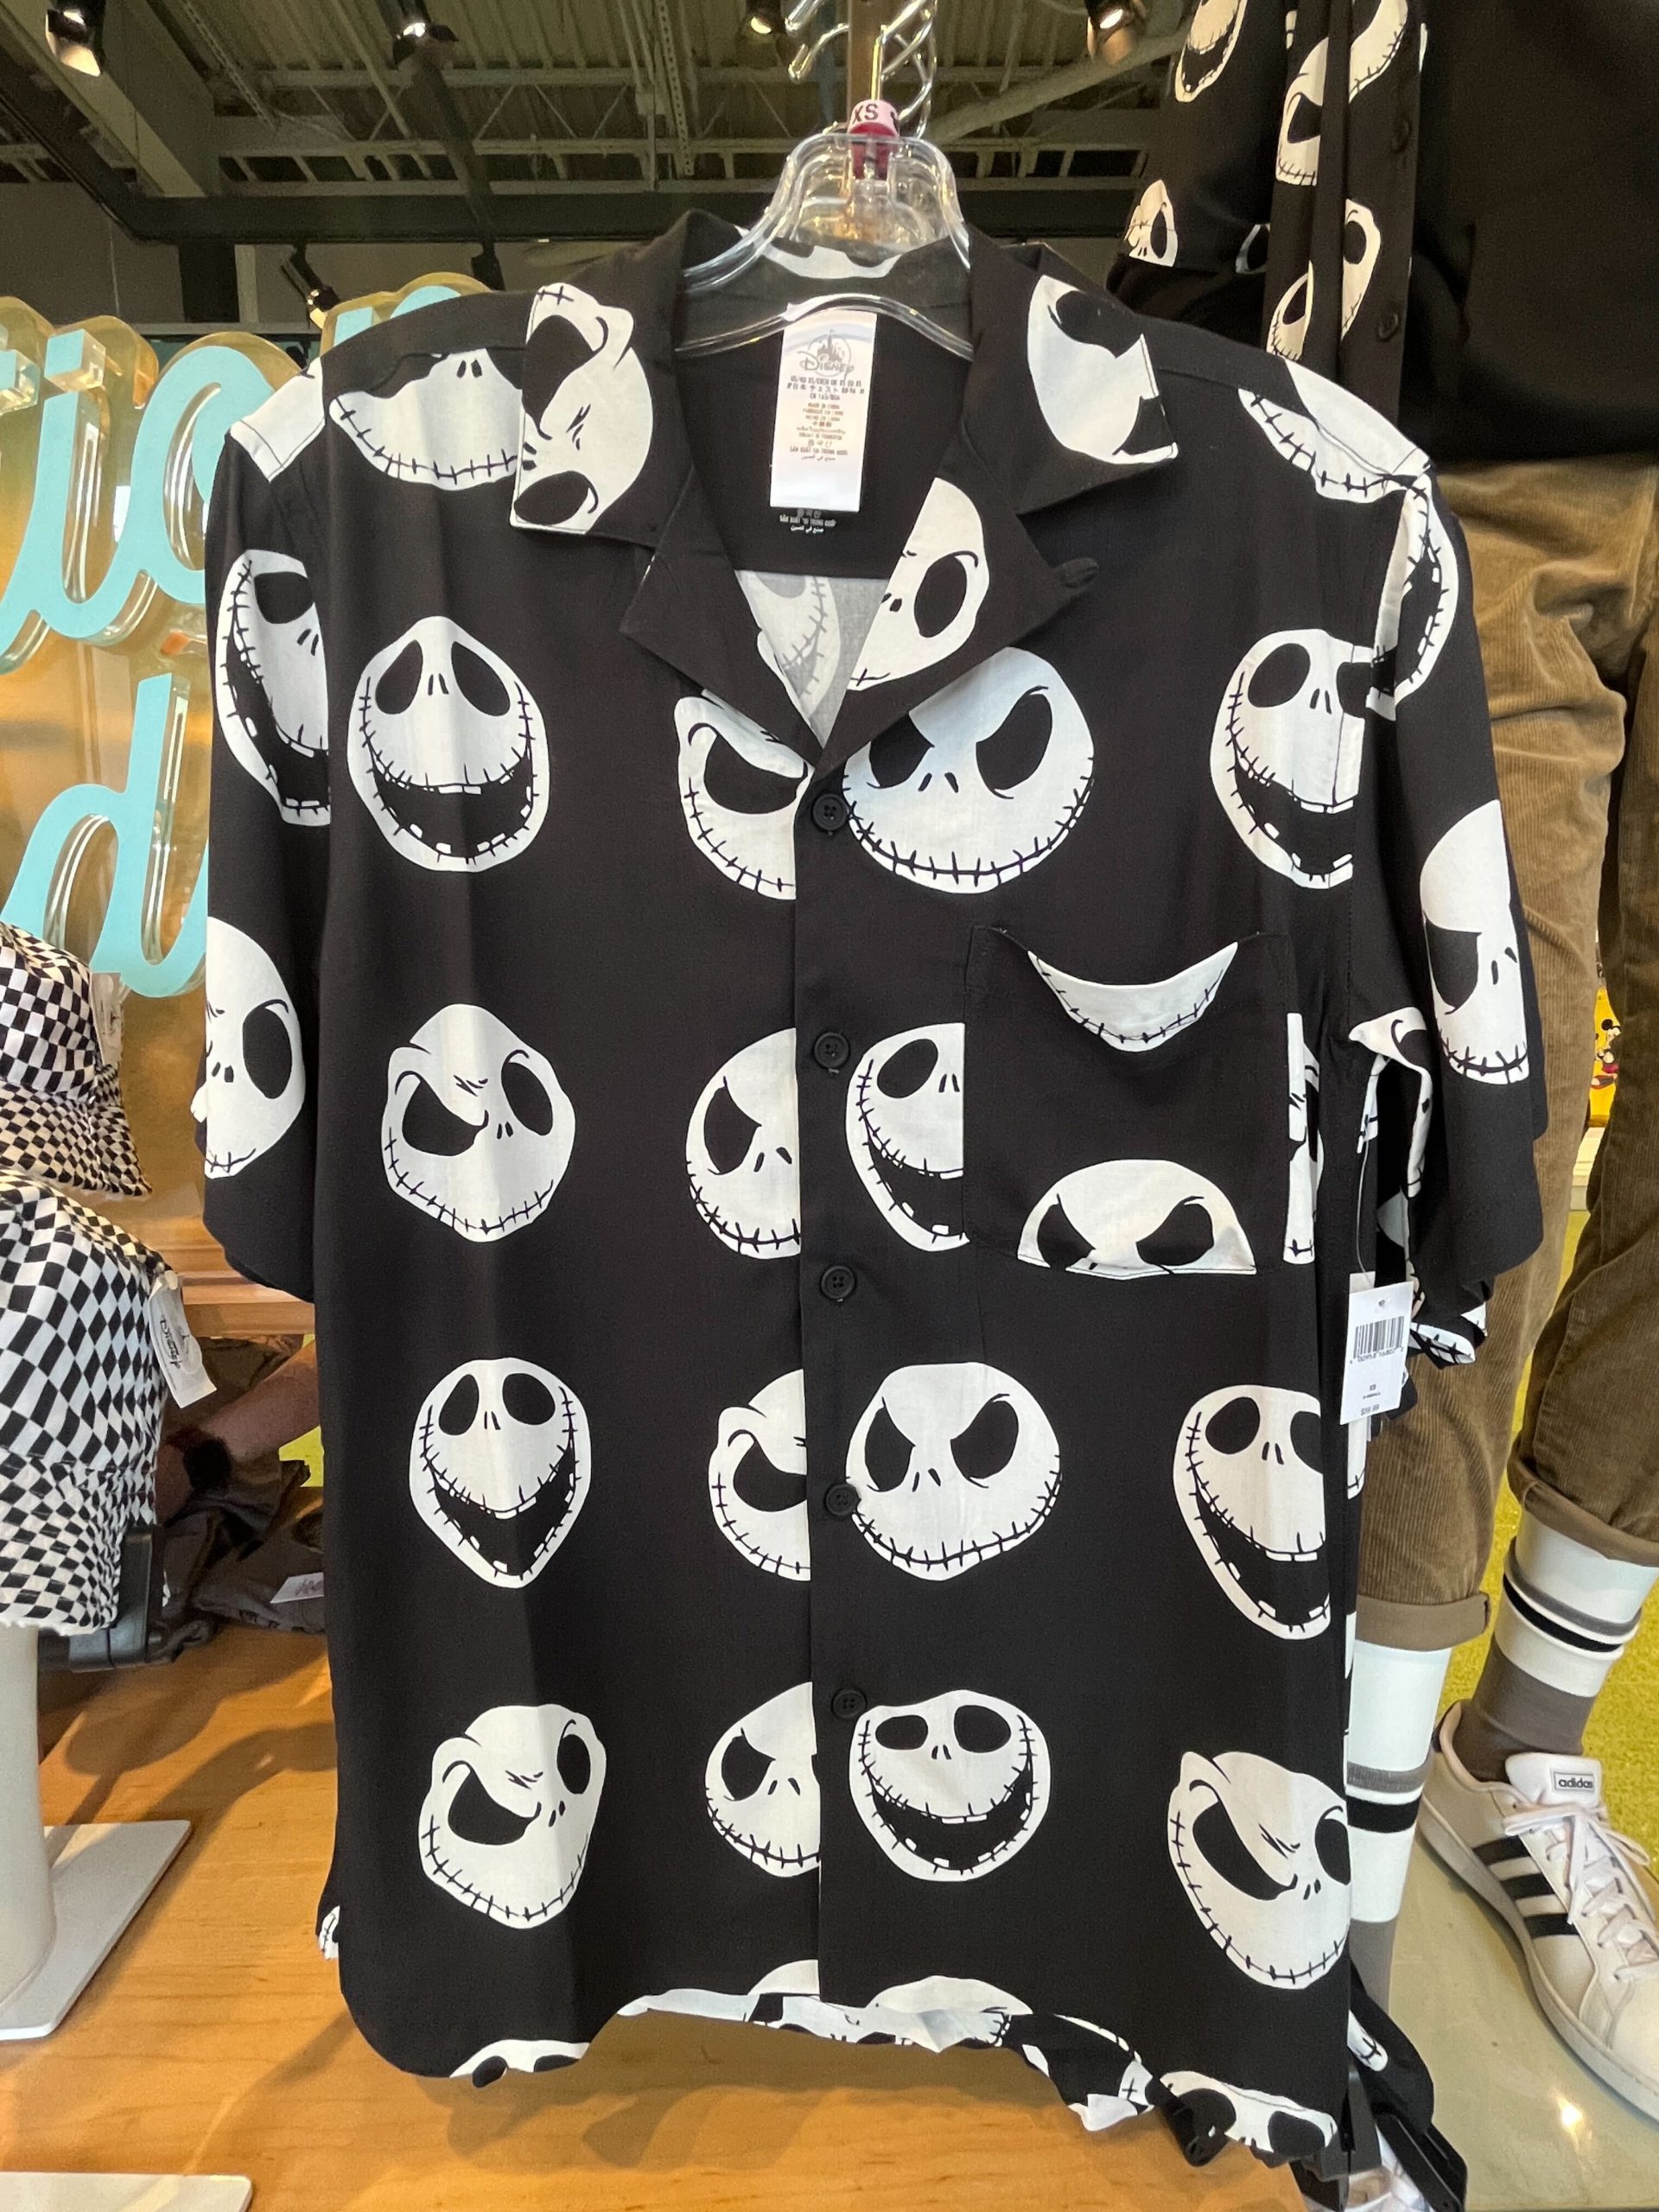 New Nightmare Before Christmas Merchandise Lands at DisneyStyle